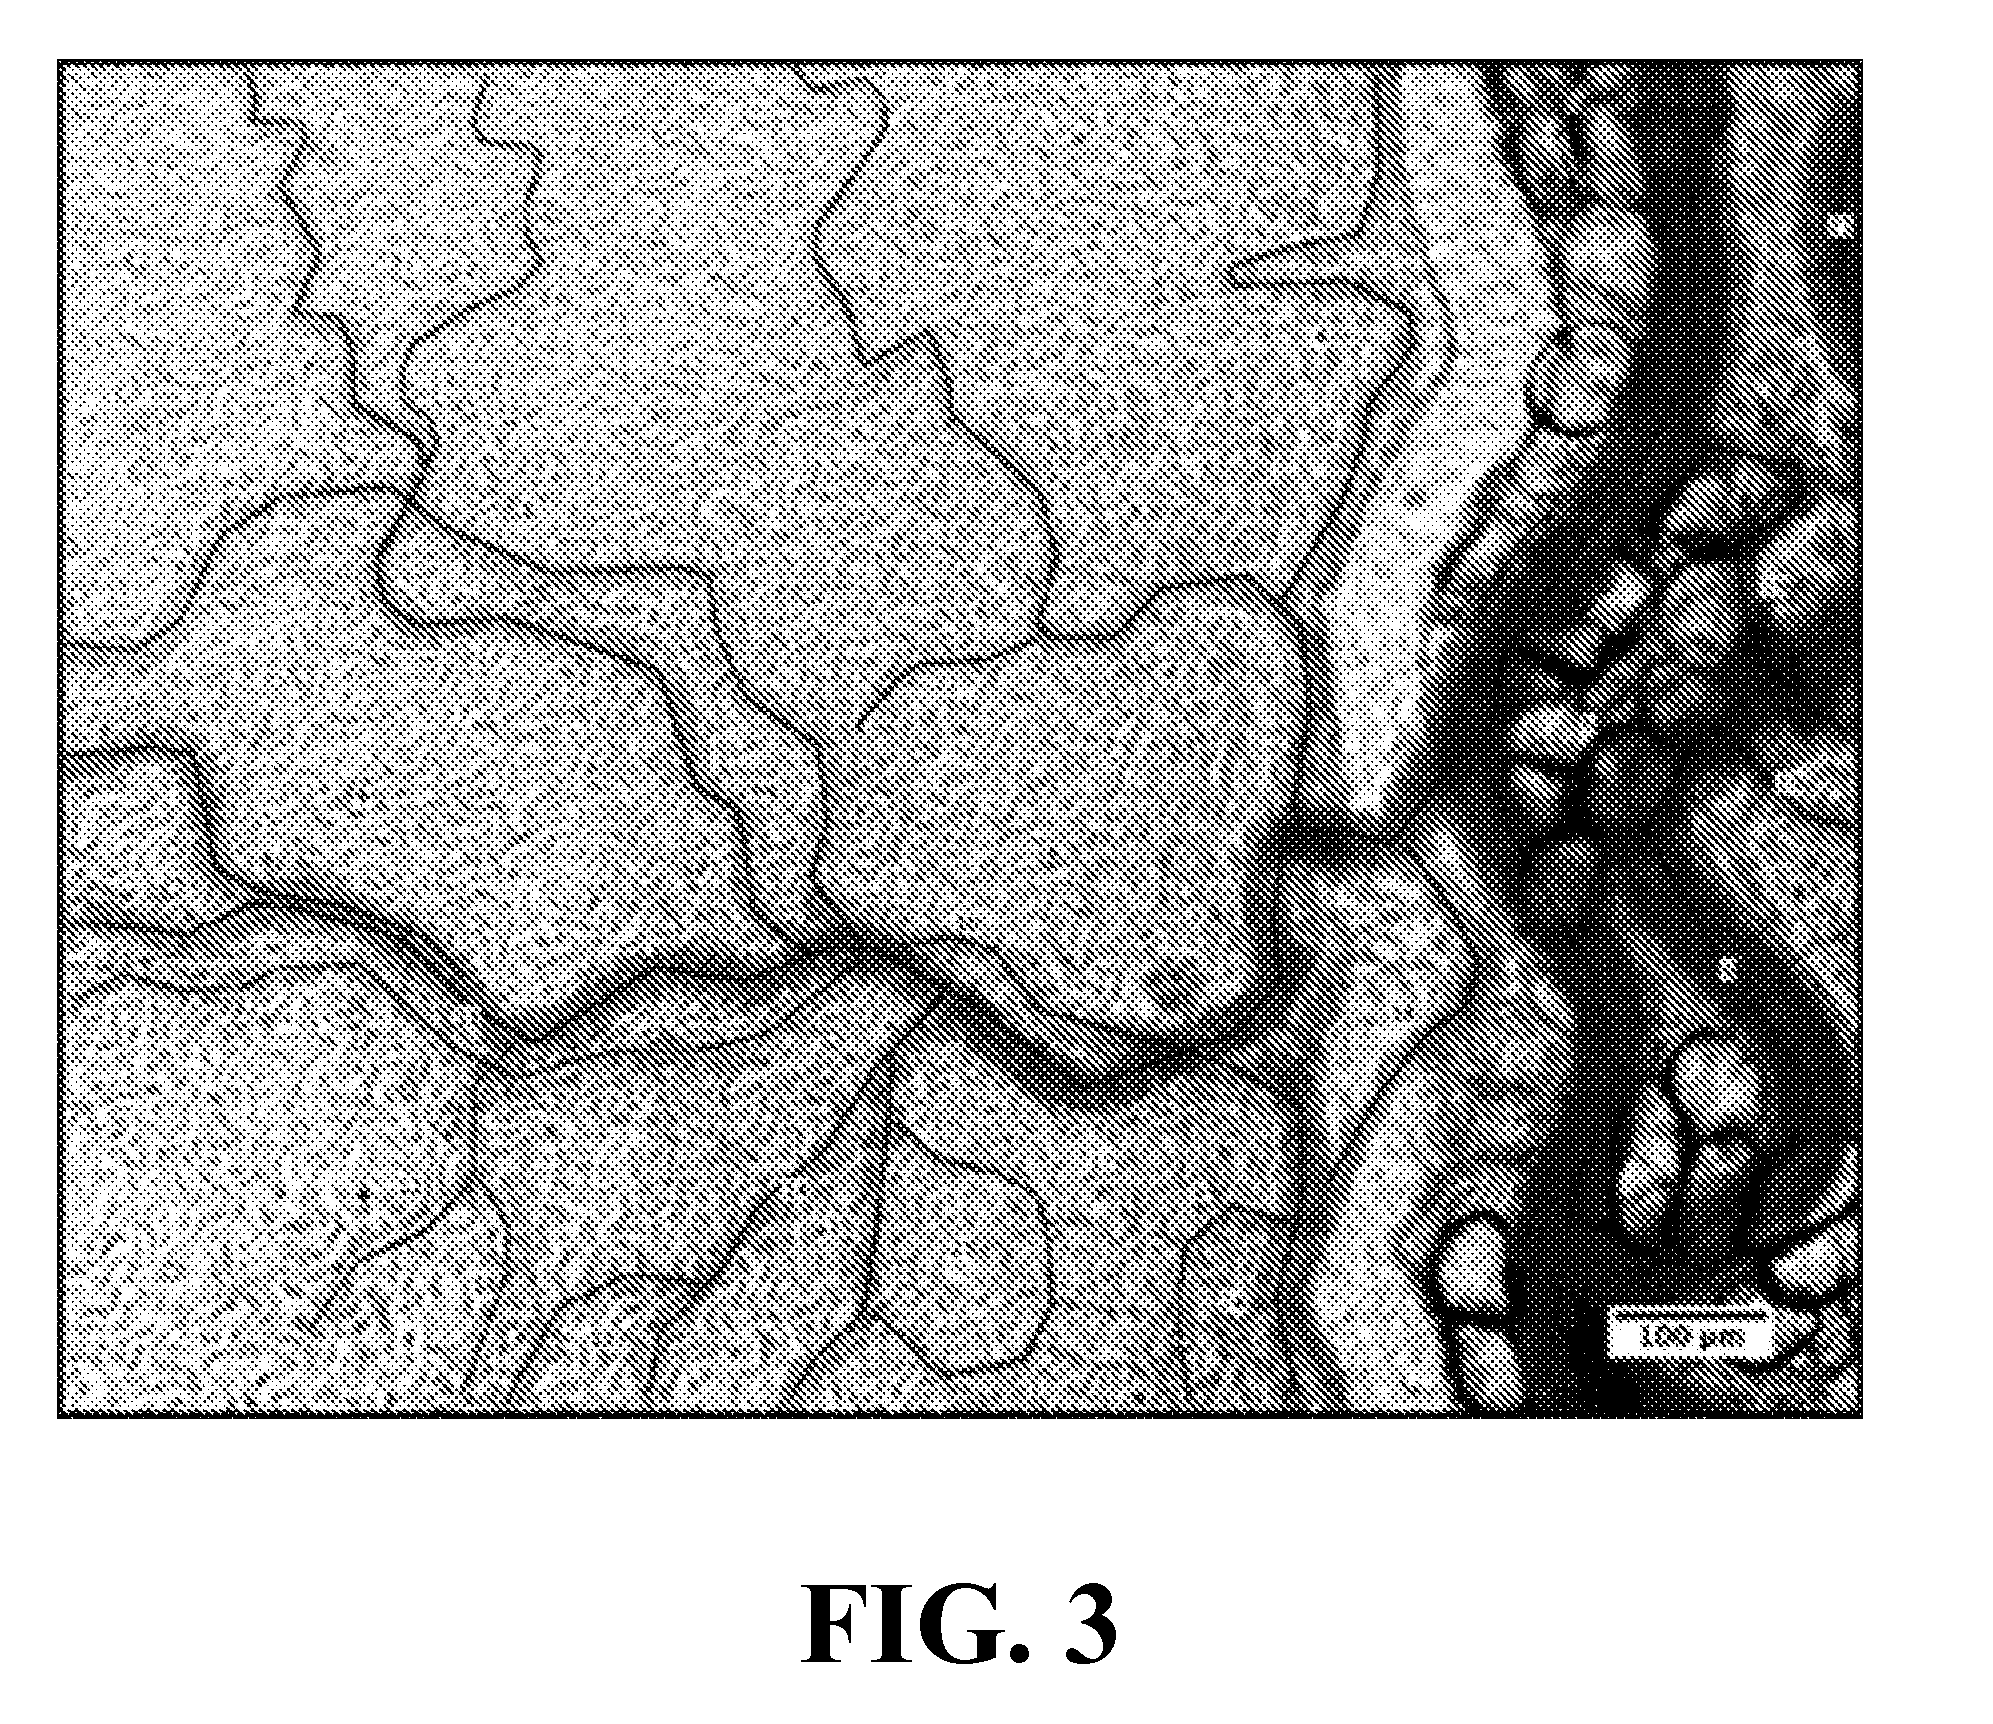 Topical Poloxamer Formulations for Enhancing Microvascular Flow: Compositions and Uses Thereof